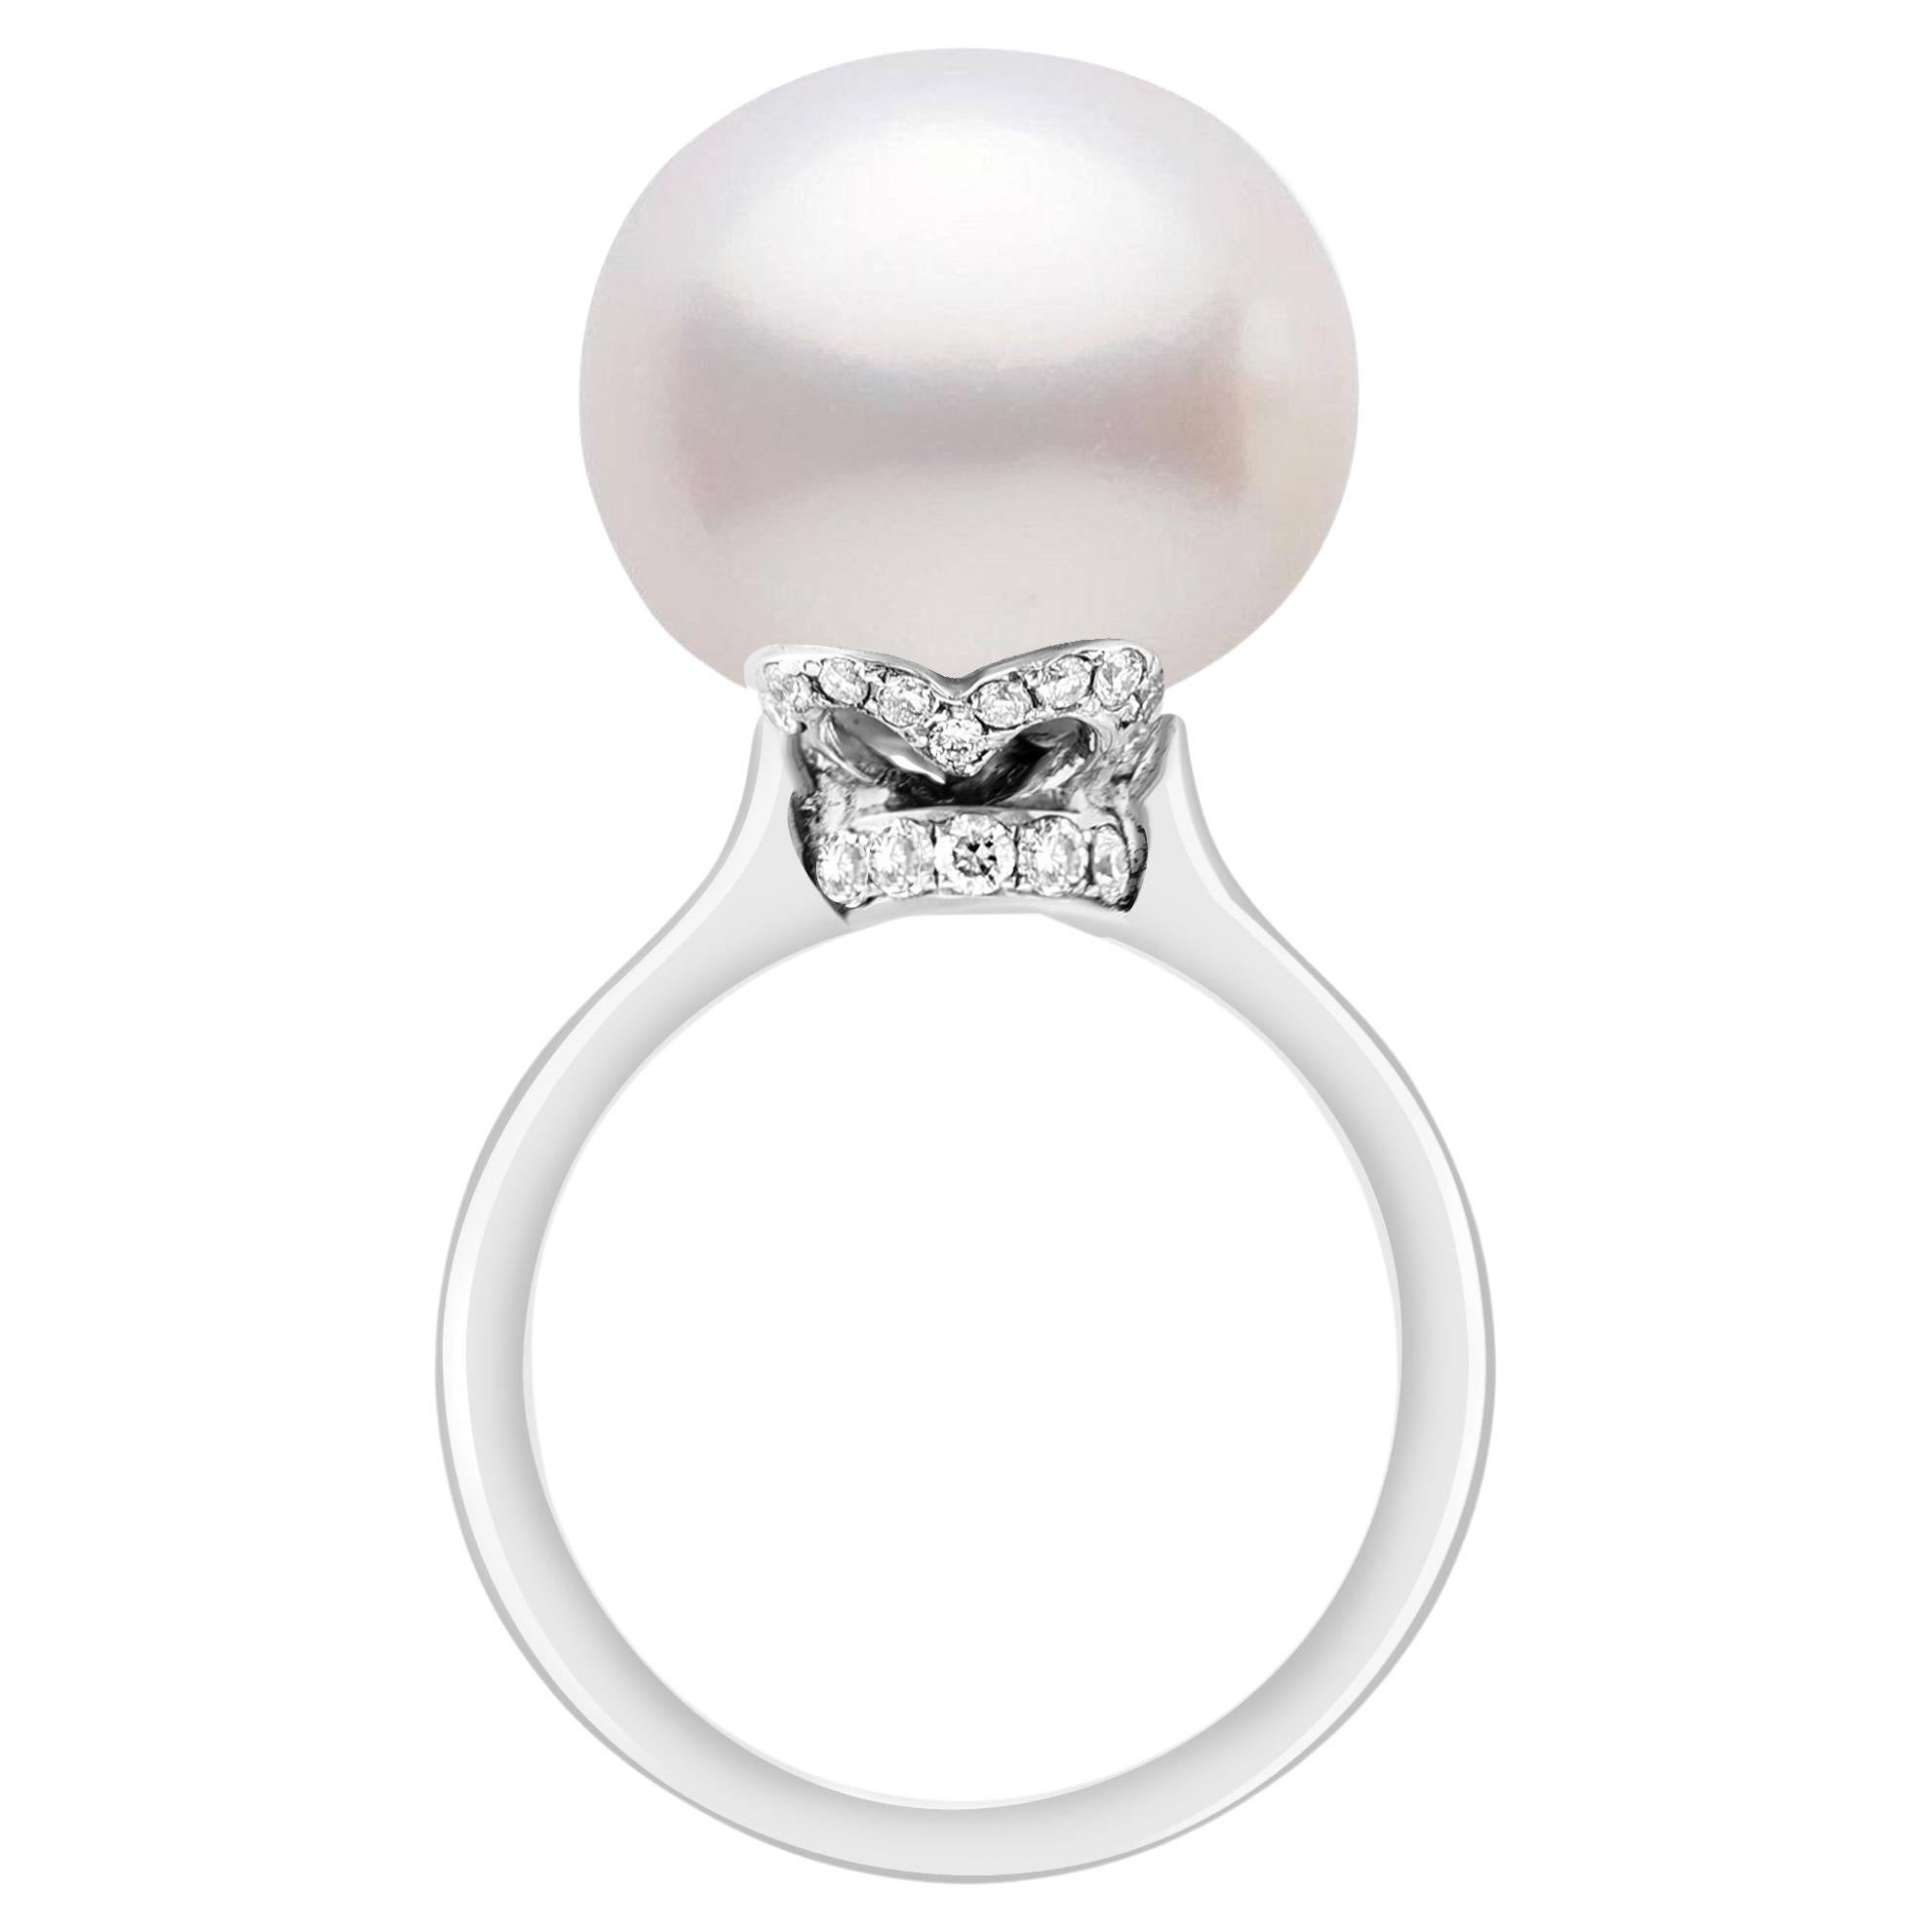 15.5MM Round White South Sea Pearl & Diamond Ring in Platinum by Valentin Magro 